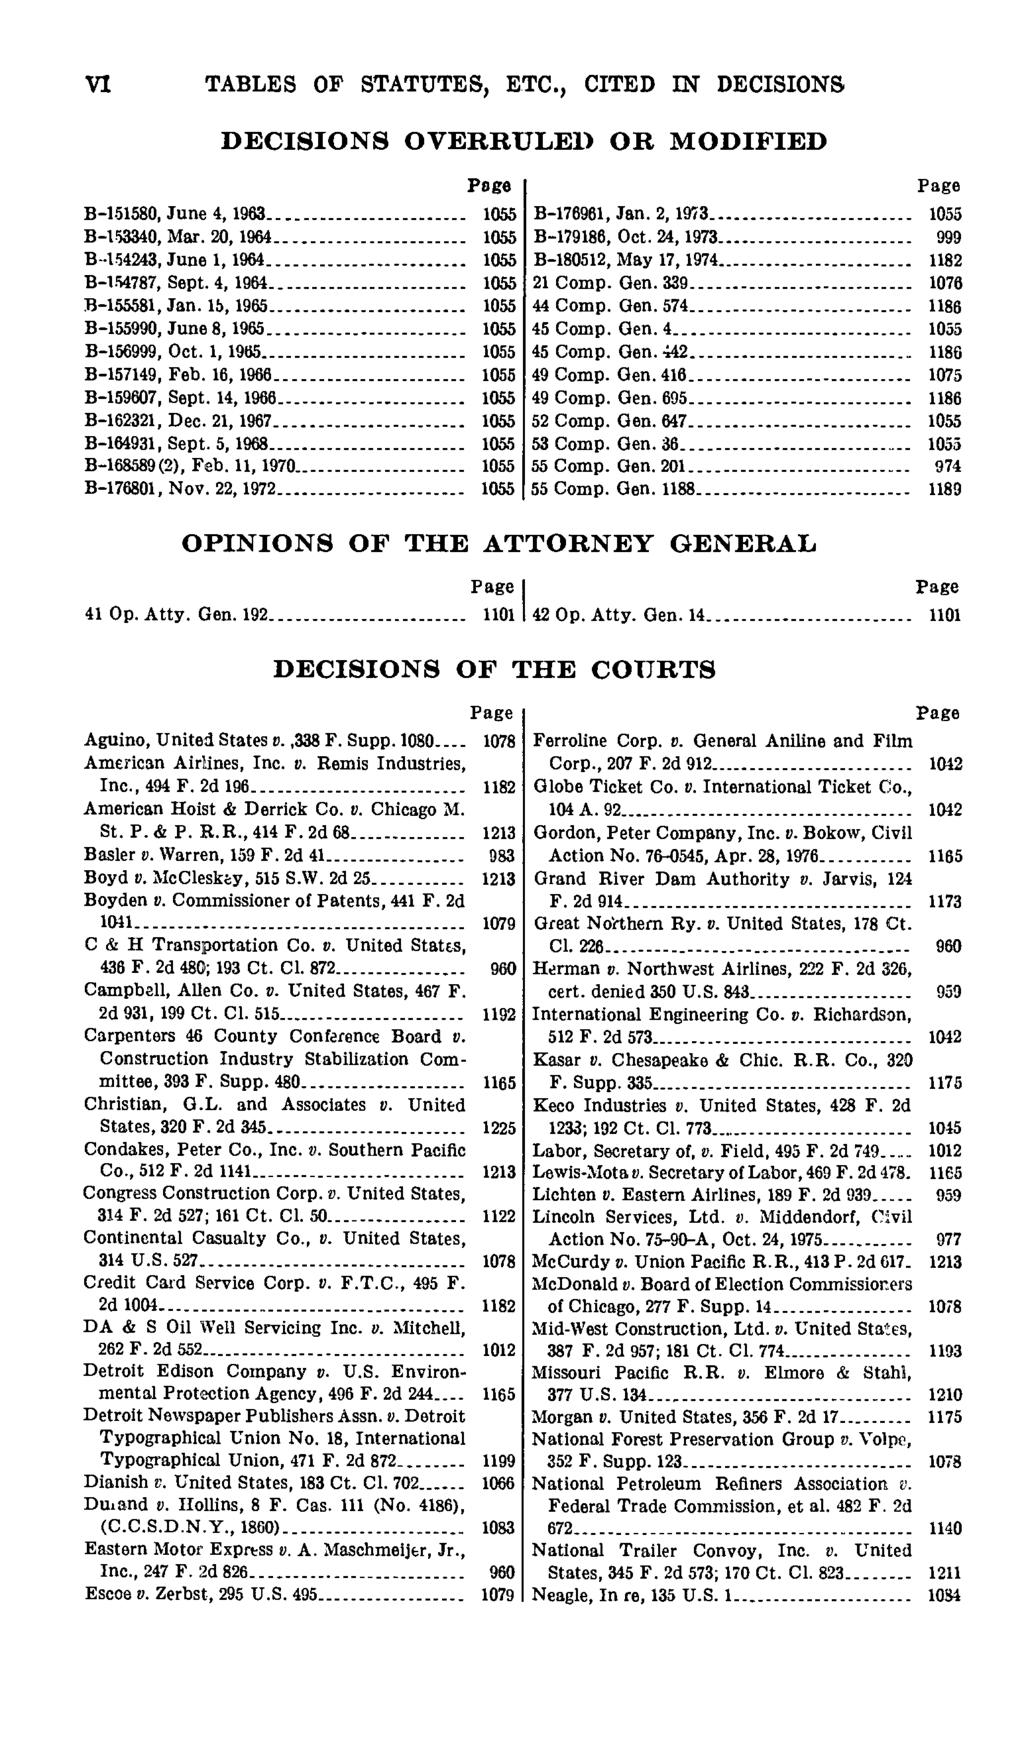 VI TABLES OF STATUTES, ETC., CITED IN DECISIONS DECISIONS OVERRULED OR MODIFIED Page B l.51580, June 4, 19 1055 B-153340, Mar. 30,1964. 1055 B-.l54343, June 1, 1964 1055 B L54787, Sept.